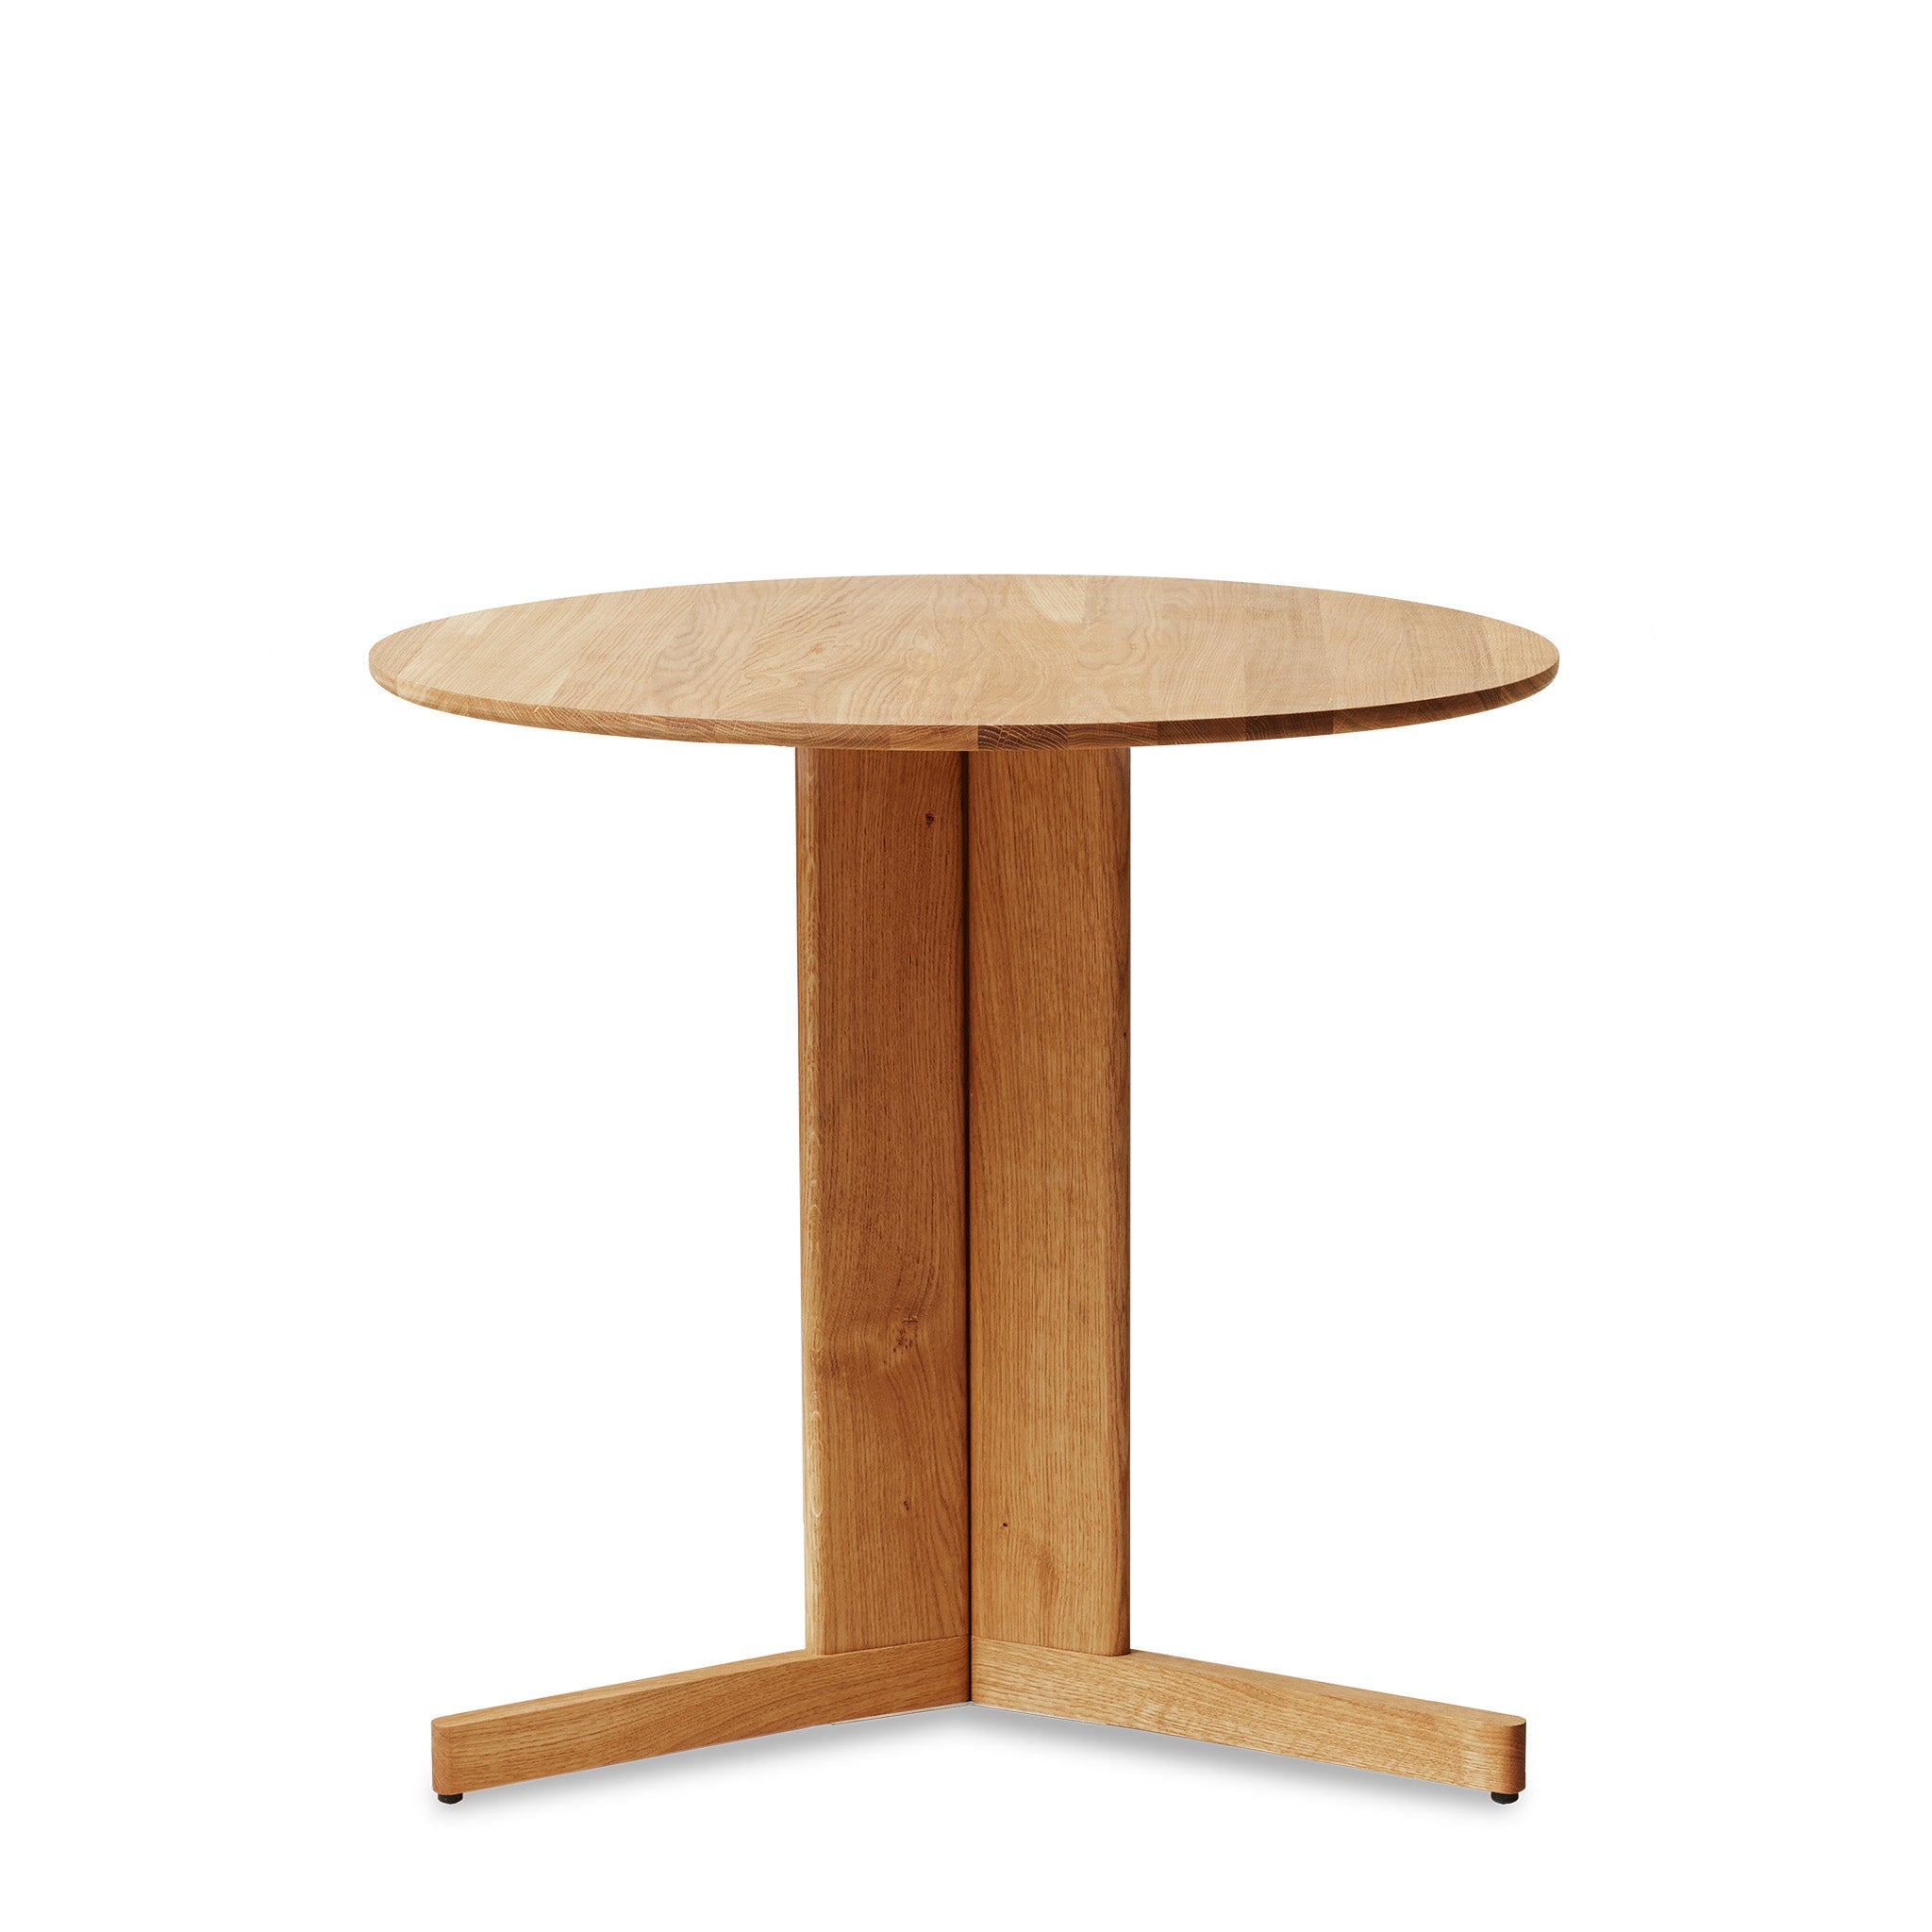 Trefoil Round Table Ø75cm by Form and Refine